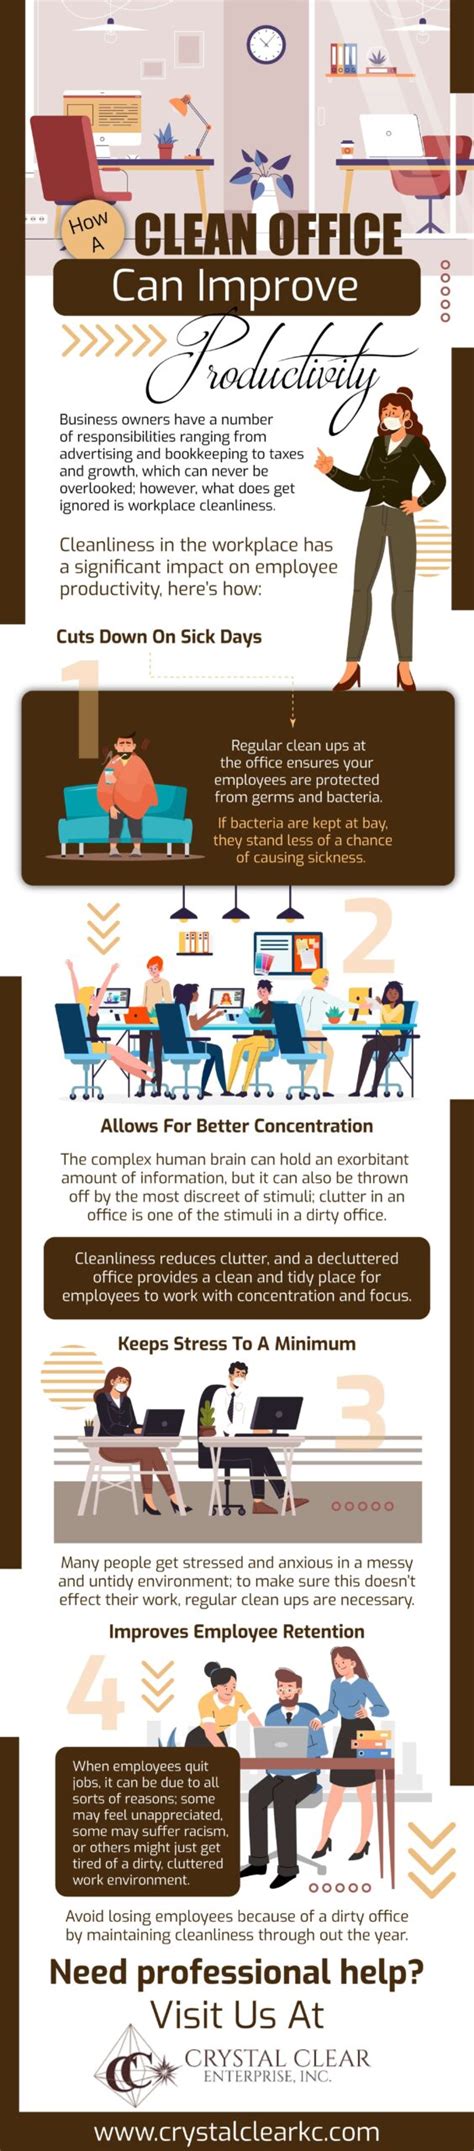 How A Clean Office Can Improve Productivity Crystal Clear Enterprise